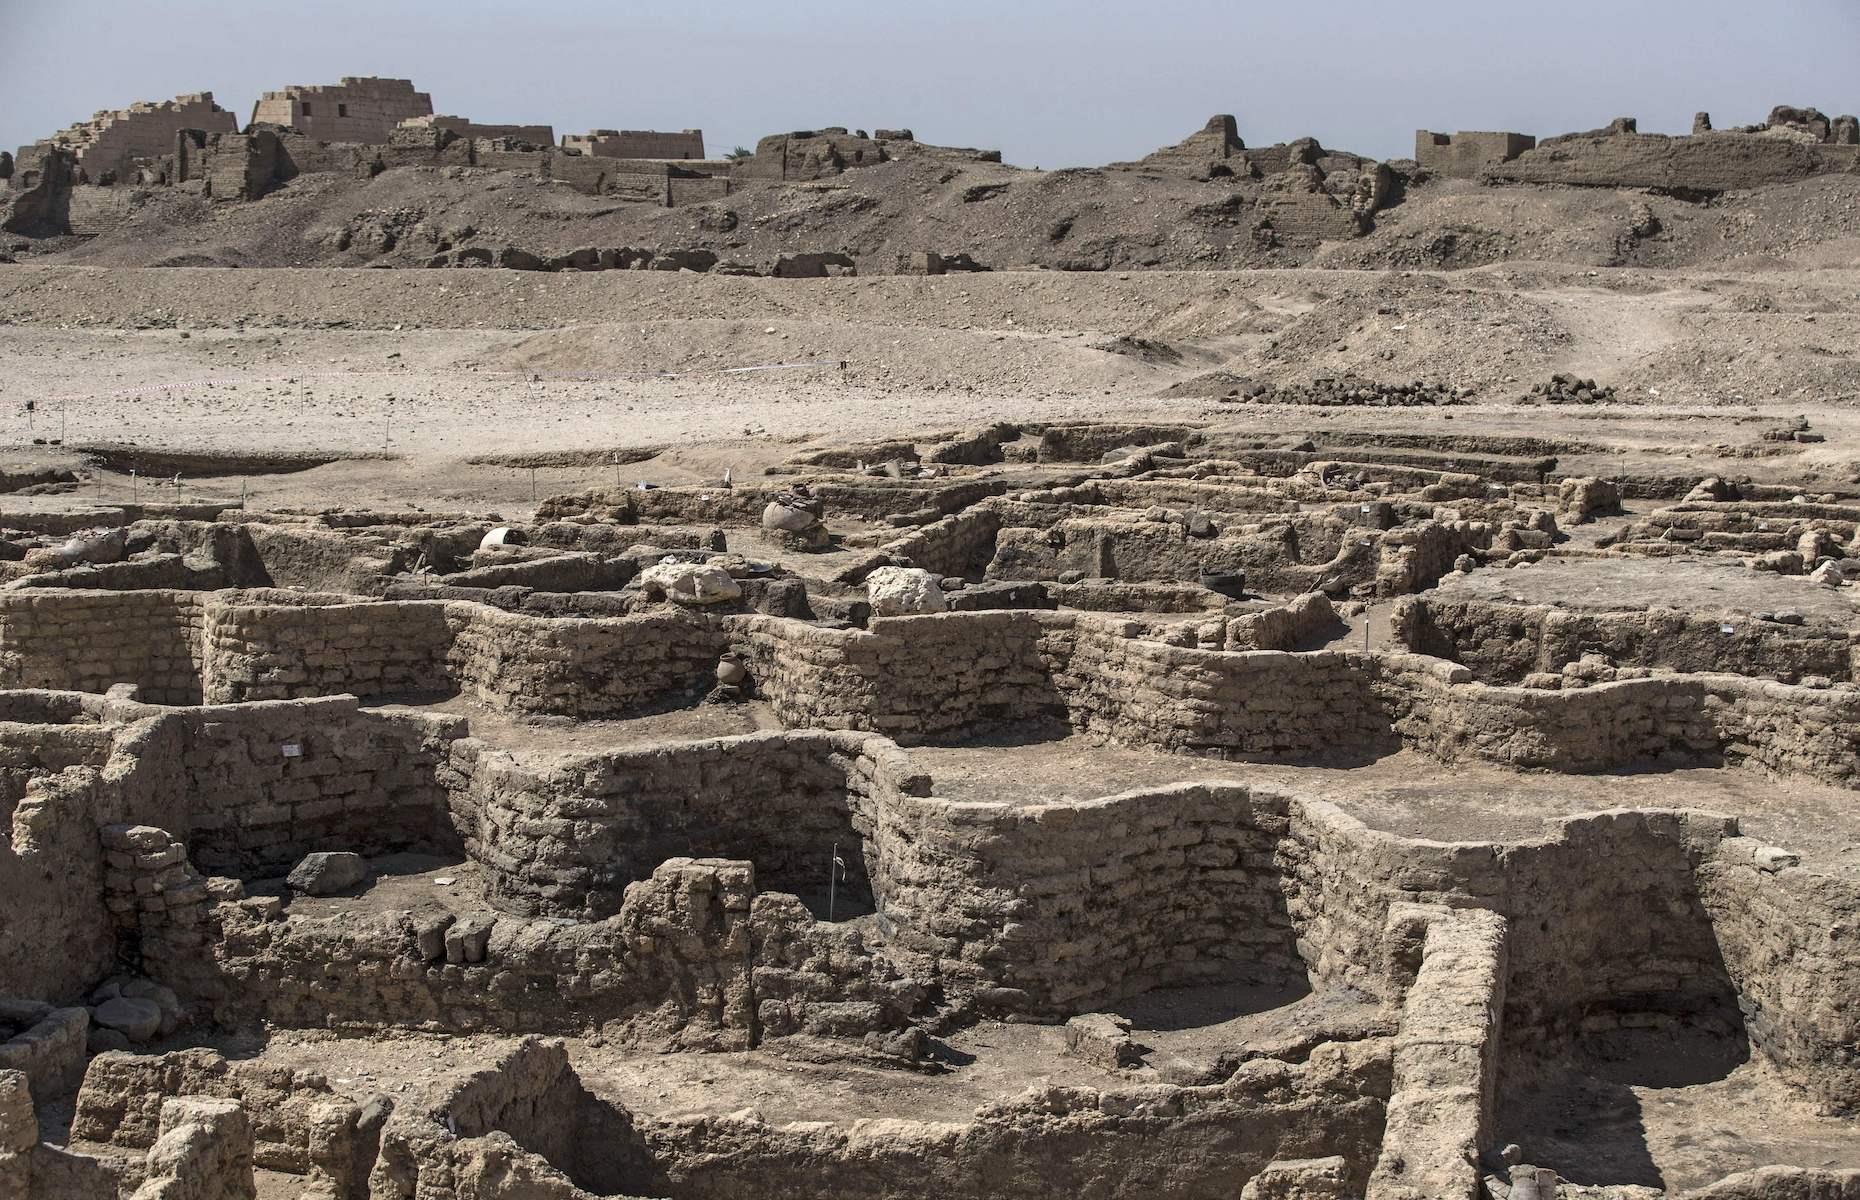 <p>Thought to be the most significant archaeological find in Egypt in the past century, <a href="https://edition.cnn.com/style/article/egypt-lost-city-rise-of-aten-scli-intl-scn/index.html">a 3,000-year-old city known as Rise of Aten</a> was uncovered under the sands near Luxor in April 2021. Described by Egyptologist Zahi Hawass as a “Lost Golden City”, it is the largest ancient city ever found in Egypt and it dates to the reign of Amenhotep III. The pharaoh ruled in the 1300s BC, during an era renowned for its wealth and power.</p>